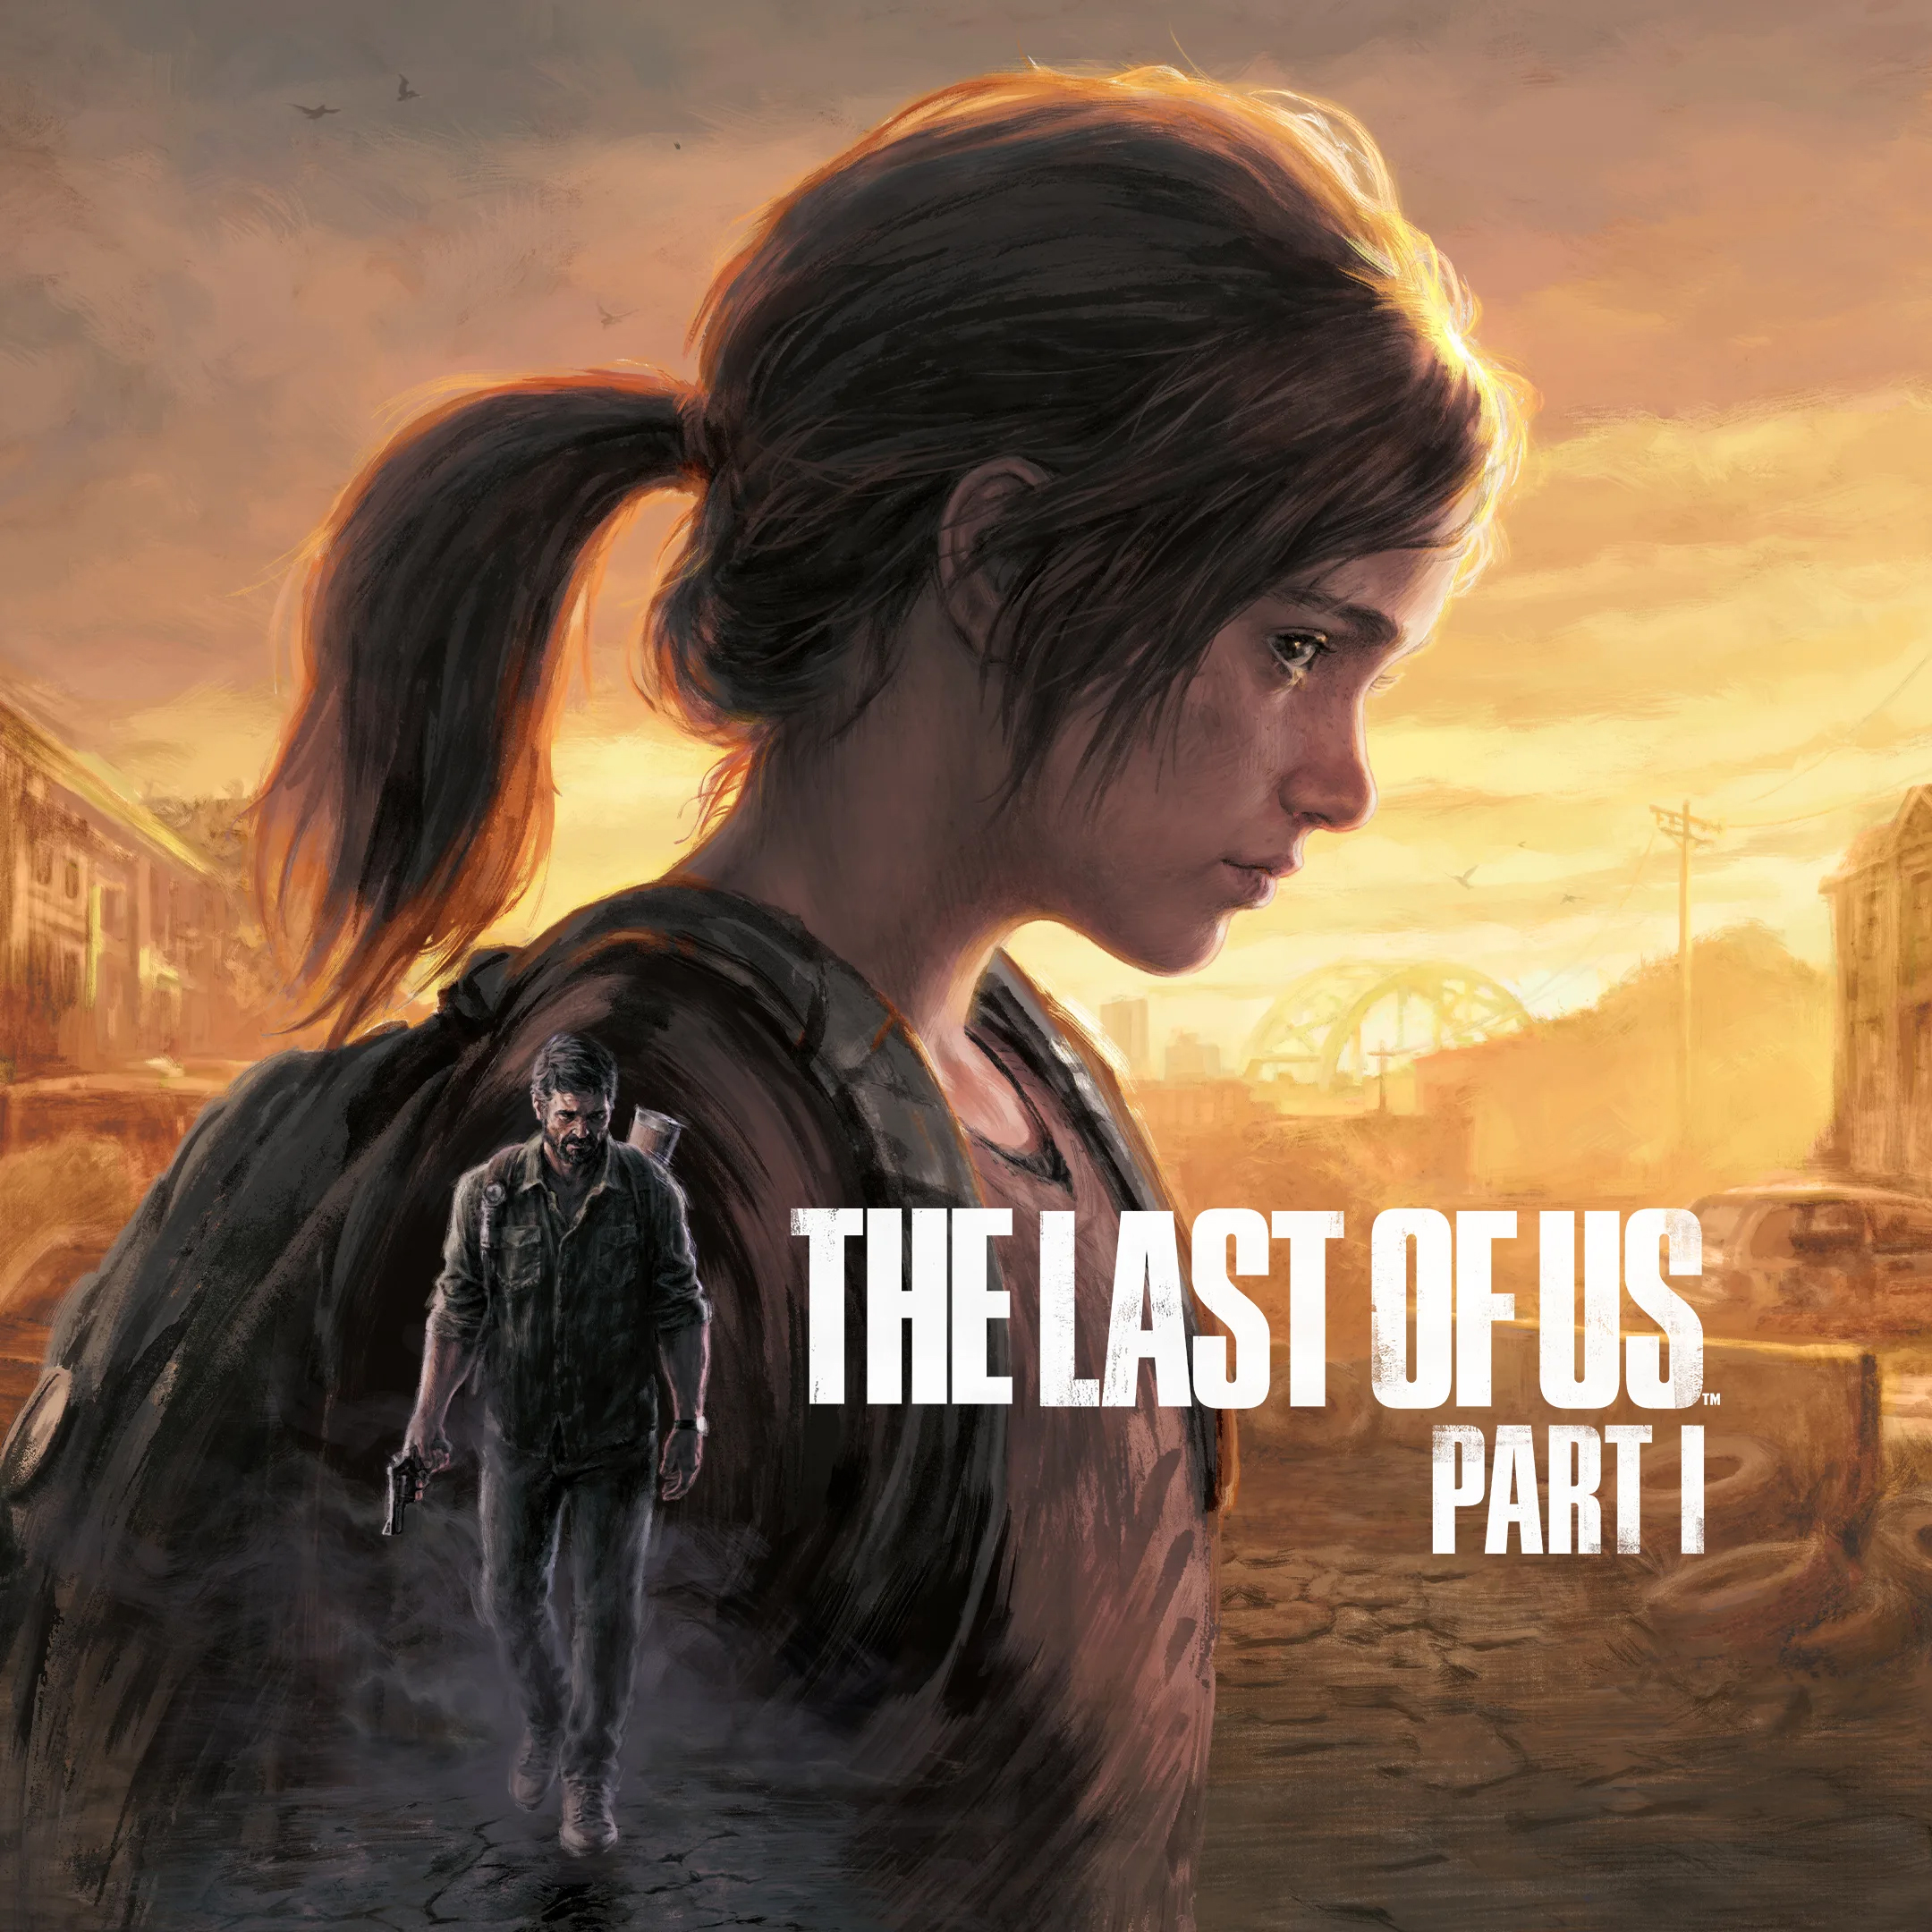 The Last of Us Remastered (PS5) 4K 60FPS HDR Gameplay - (Full Game) 